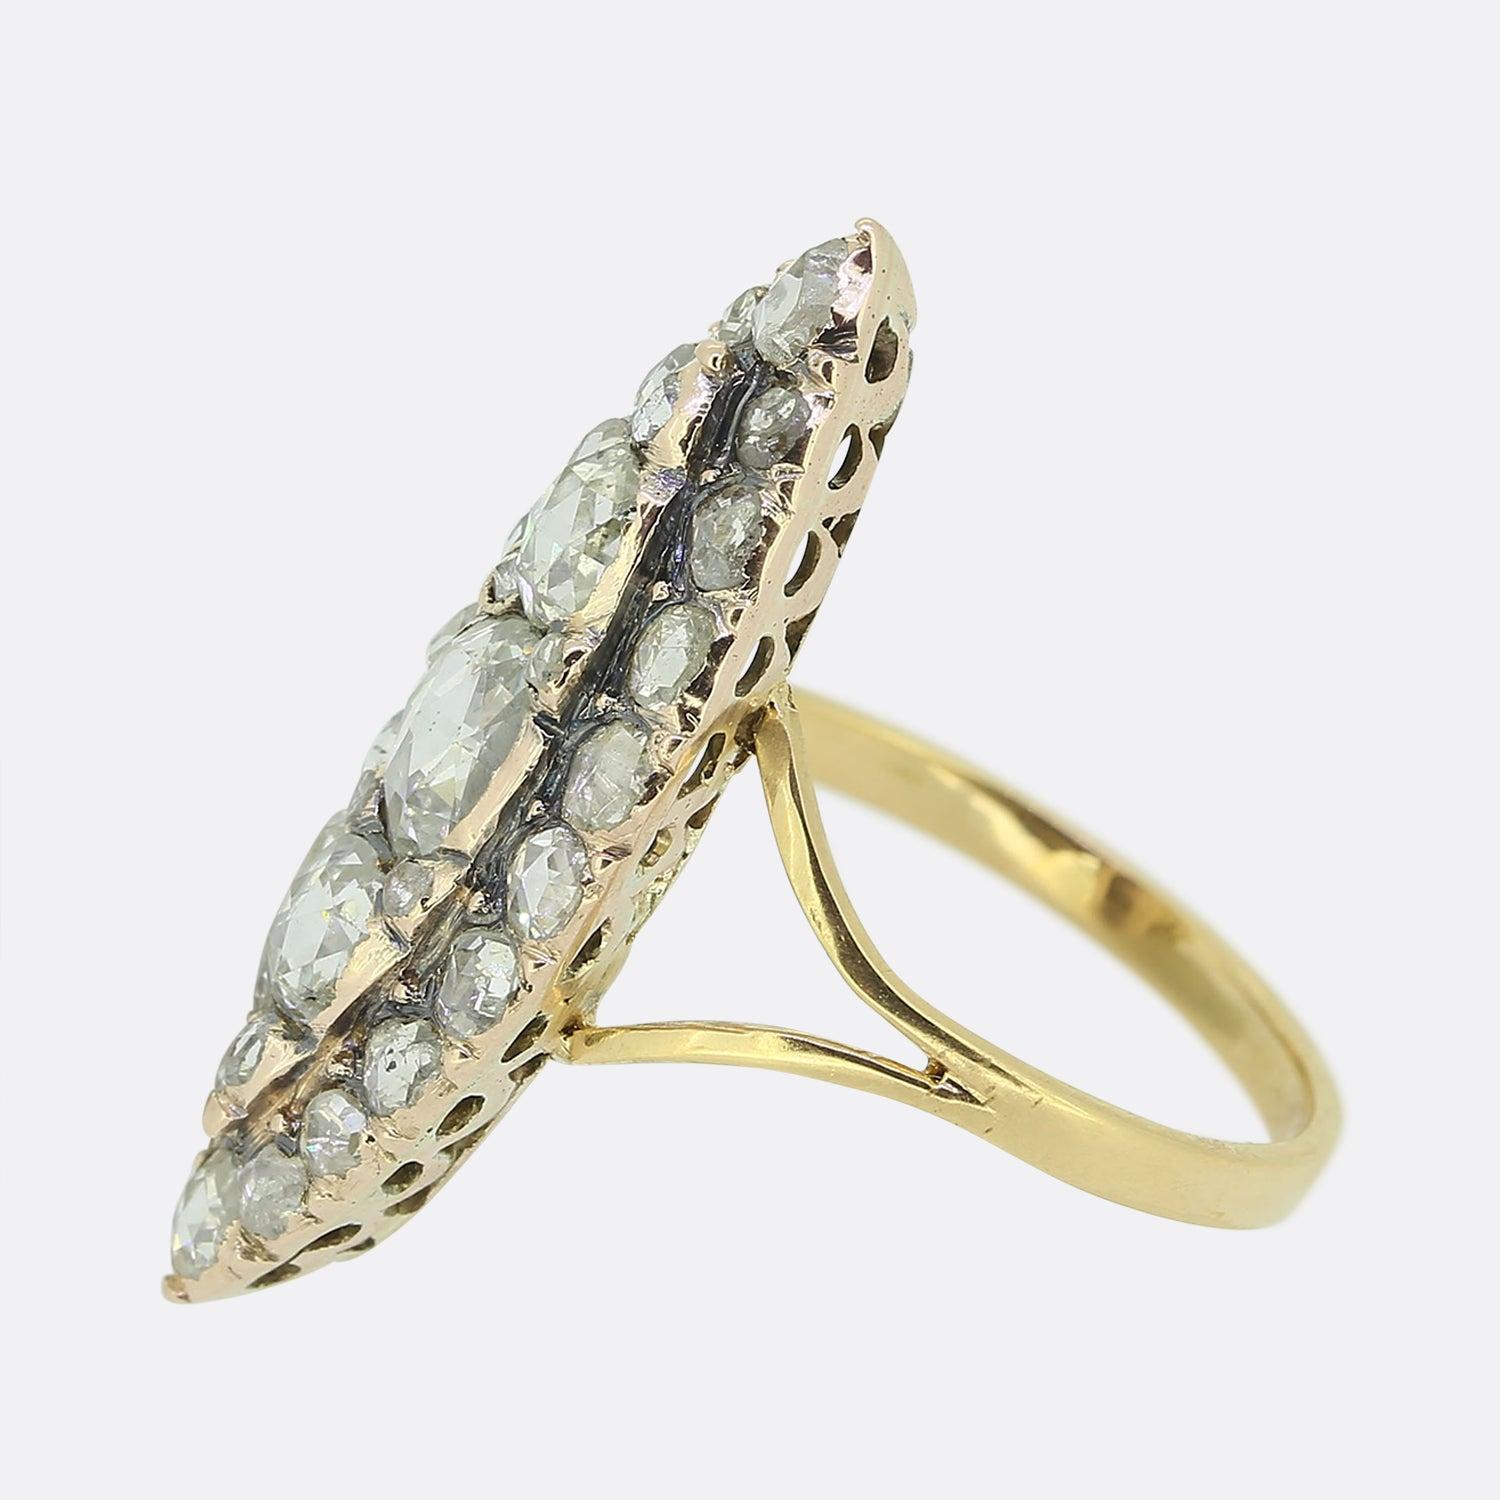 Here we have a gorgeous navette ring originally dating back to the Georgian period. The face of this antique piece has been crafted from yellow gold into a boat-like shape which plays host to a trio of centralised oval shaped rose cut diamonds.